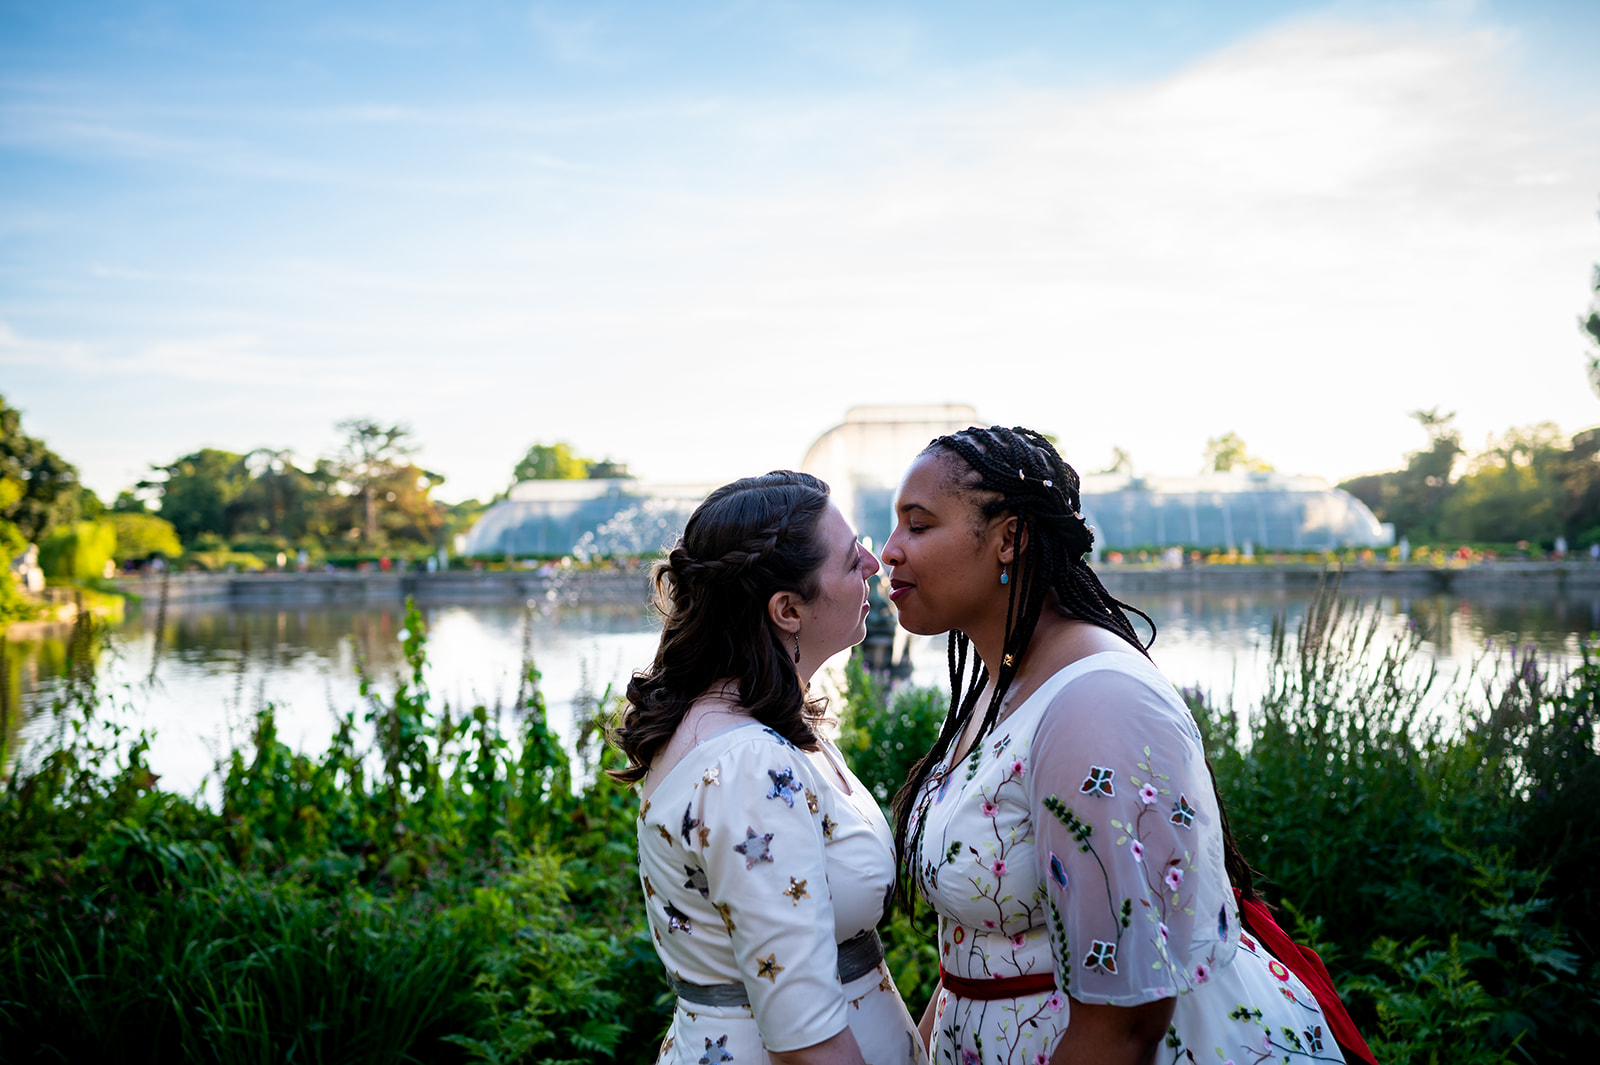 golden hour photos in front of a fountain for two lovely brides on their wedding day at Kew Gardens